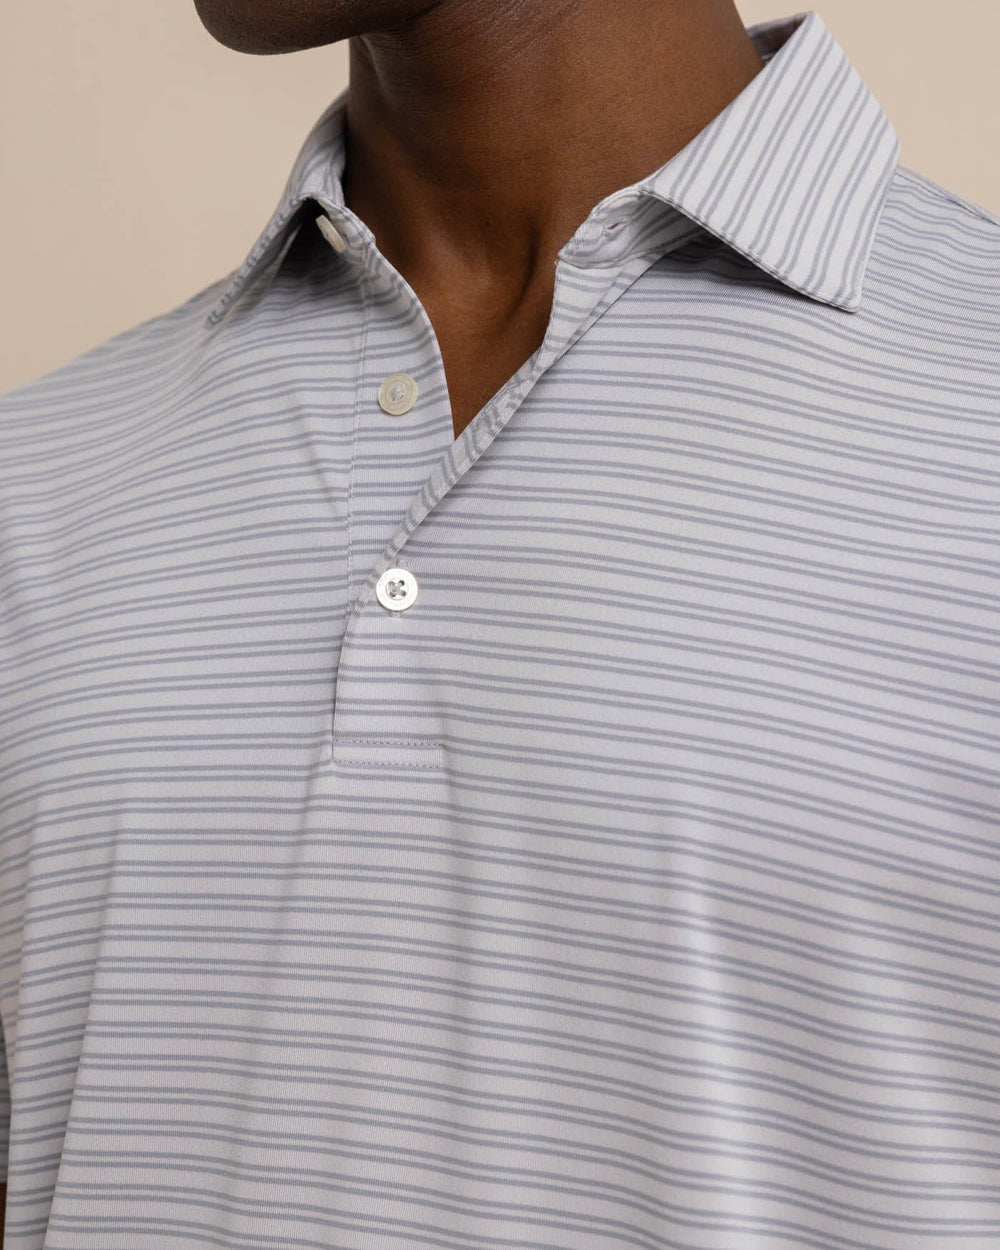 The detail view of the Southern Tide Driver Baywoods Stripe Polo by Southern Tide - Platinum Grey